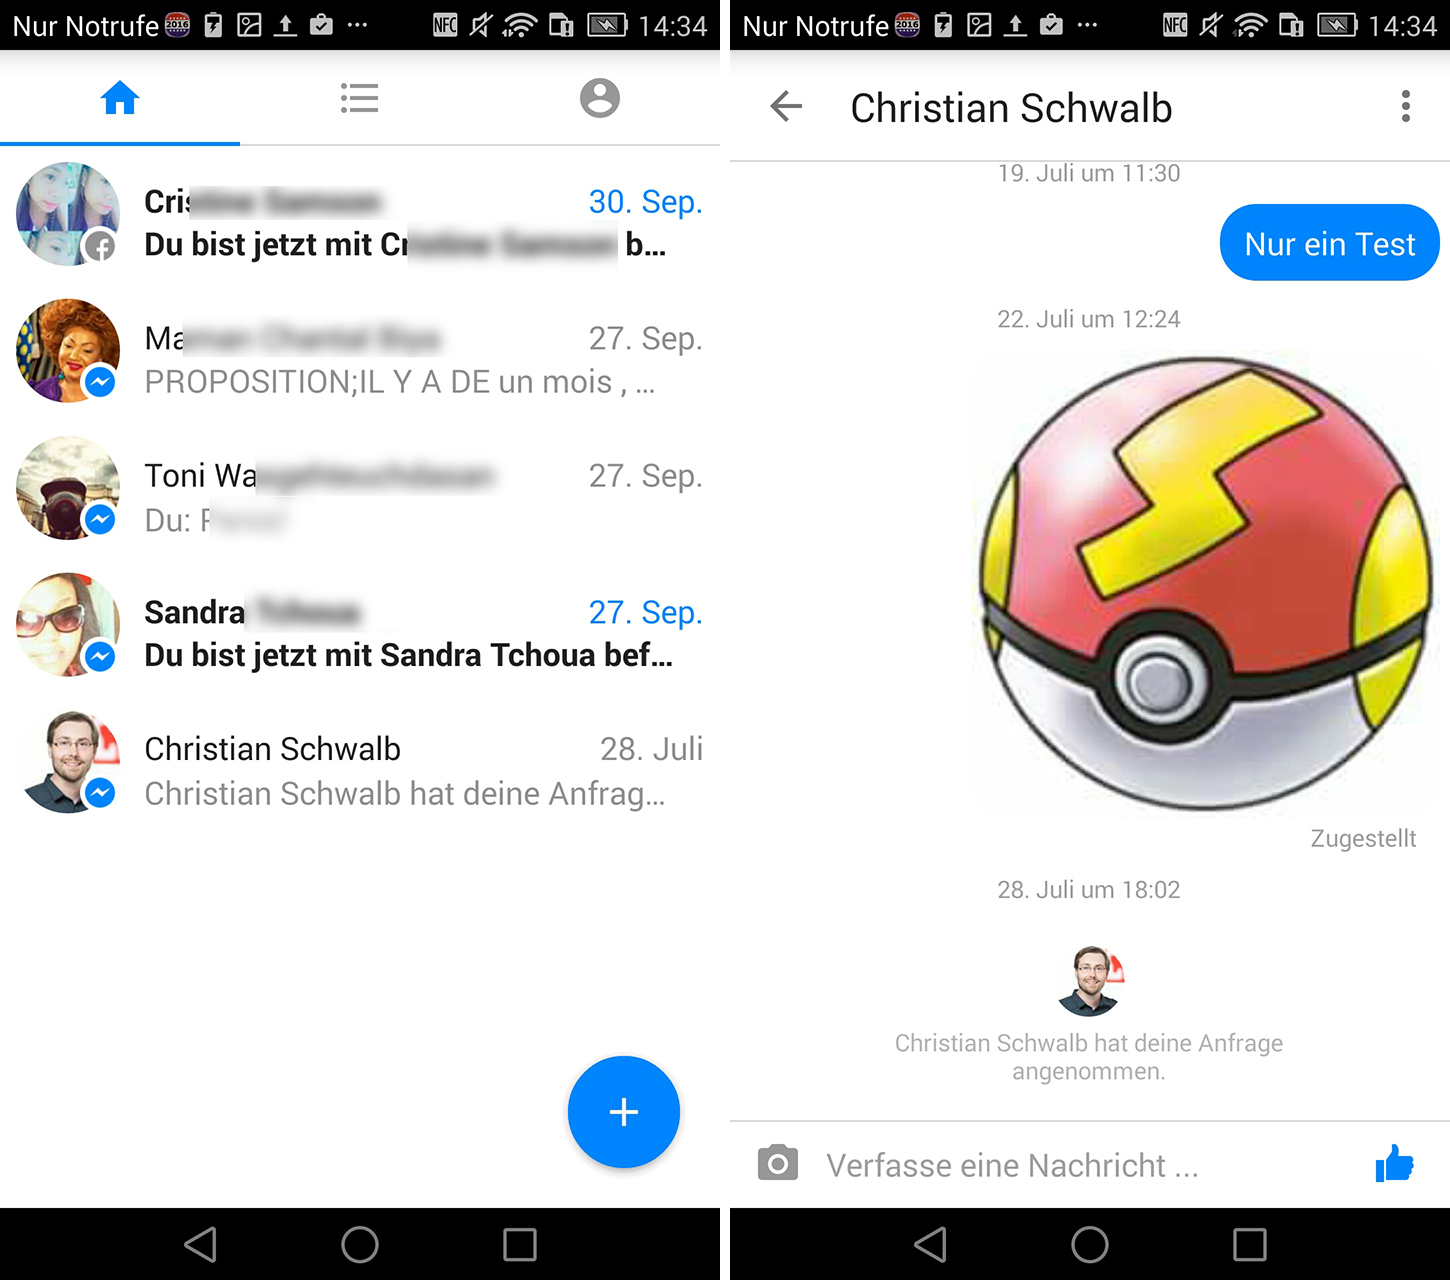 facebook messenger for android free download apk